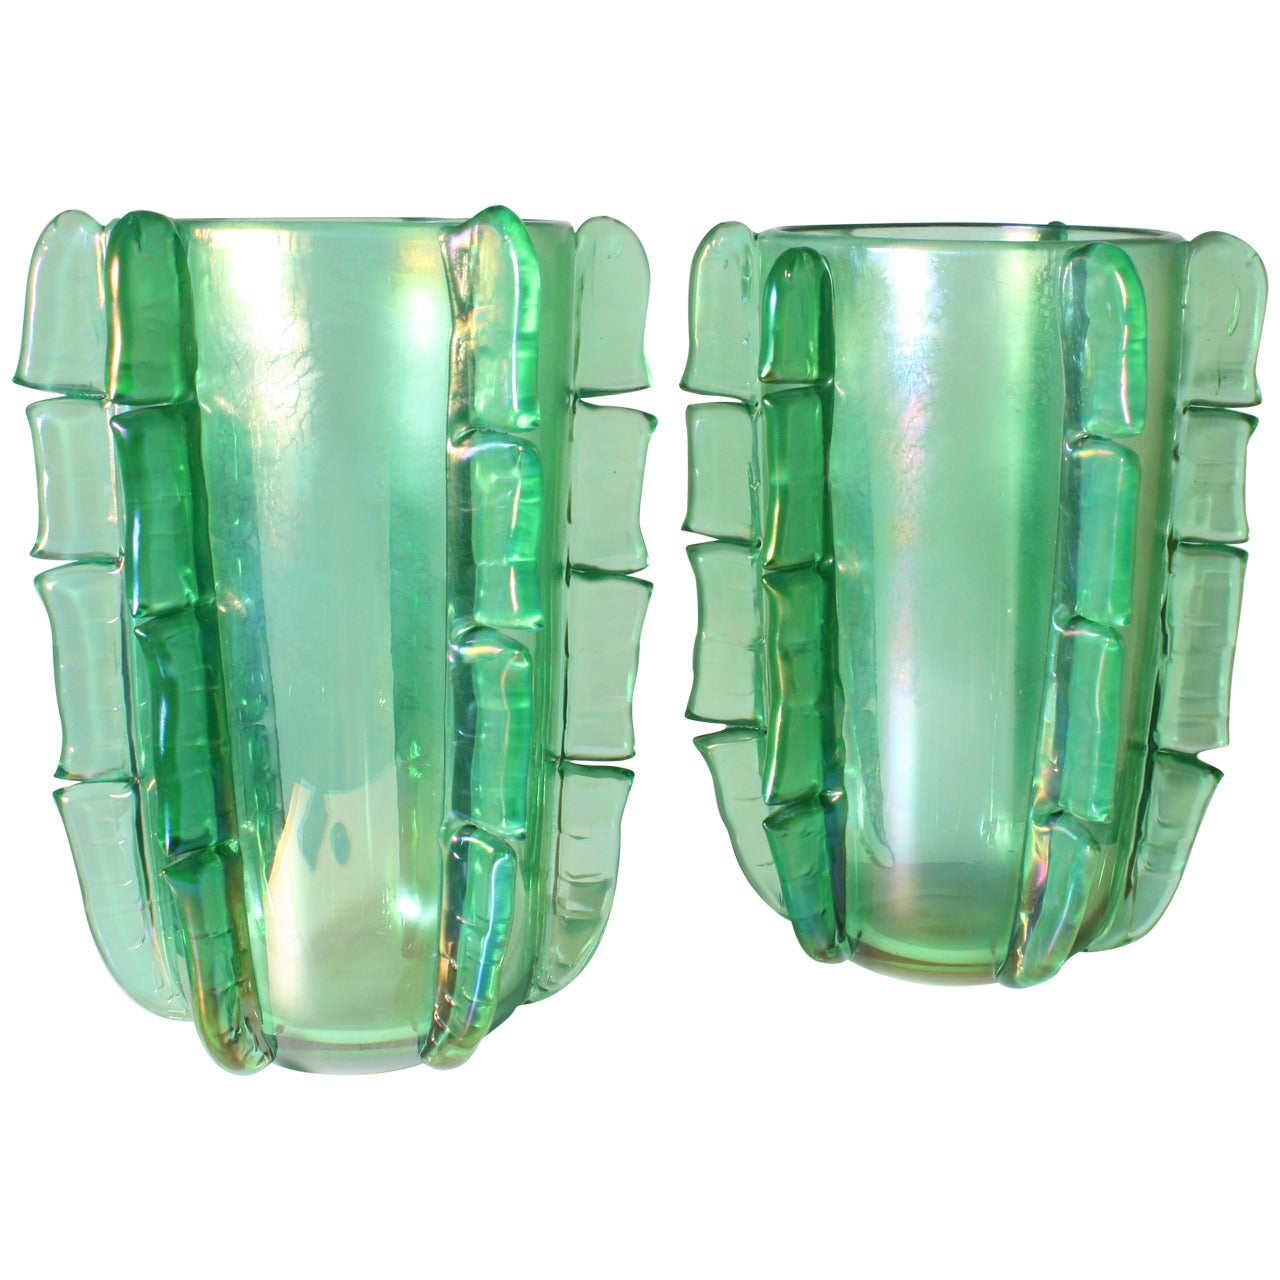 Pair of Green Murano Vases Signed by Pino Signoretto, circa 2000